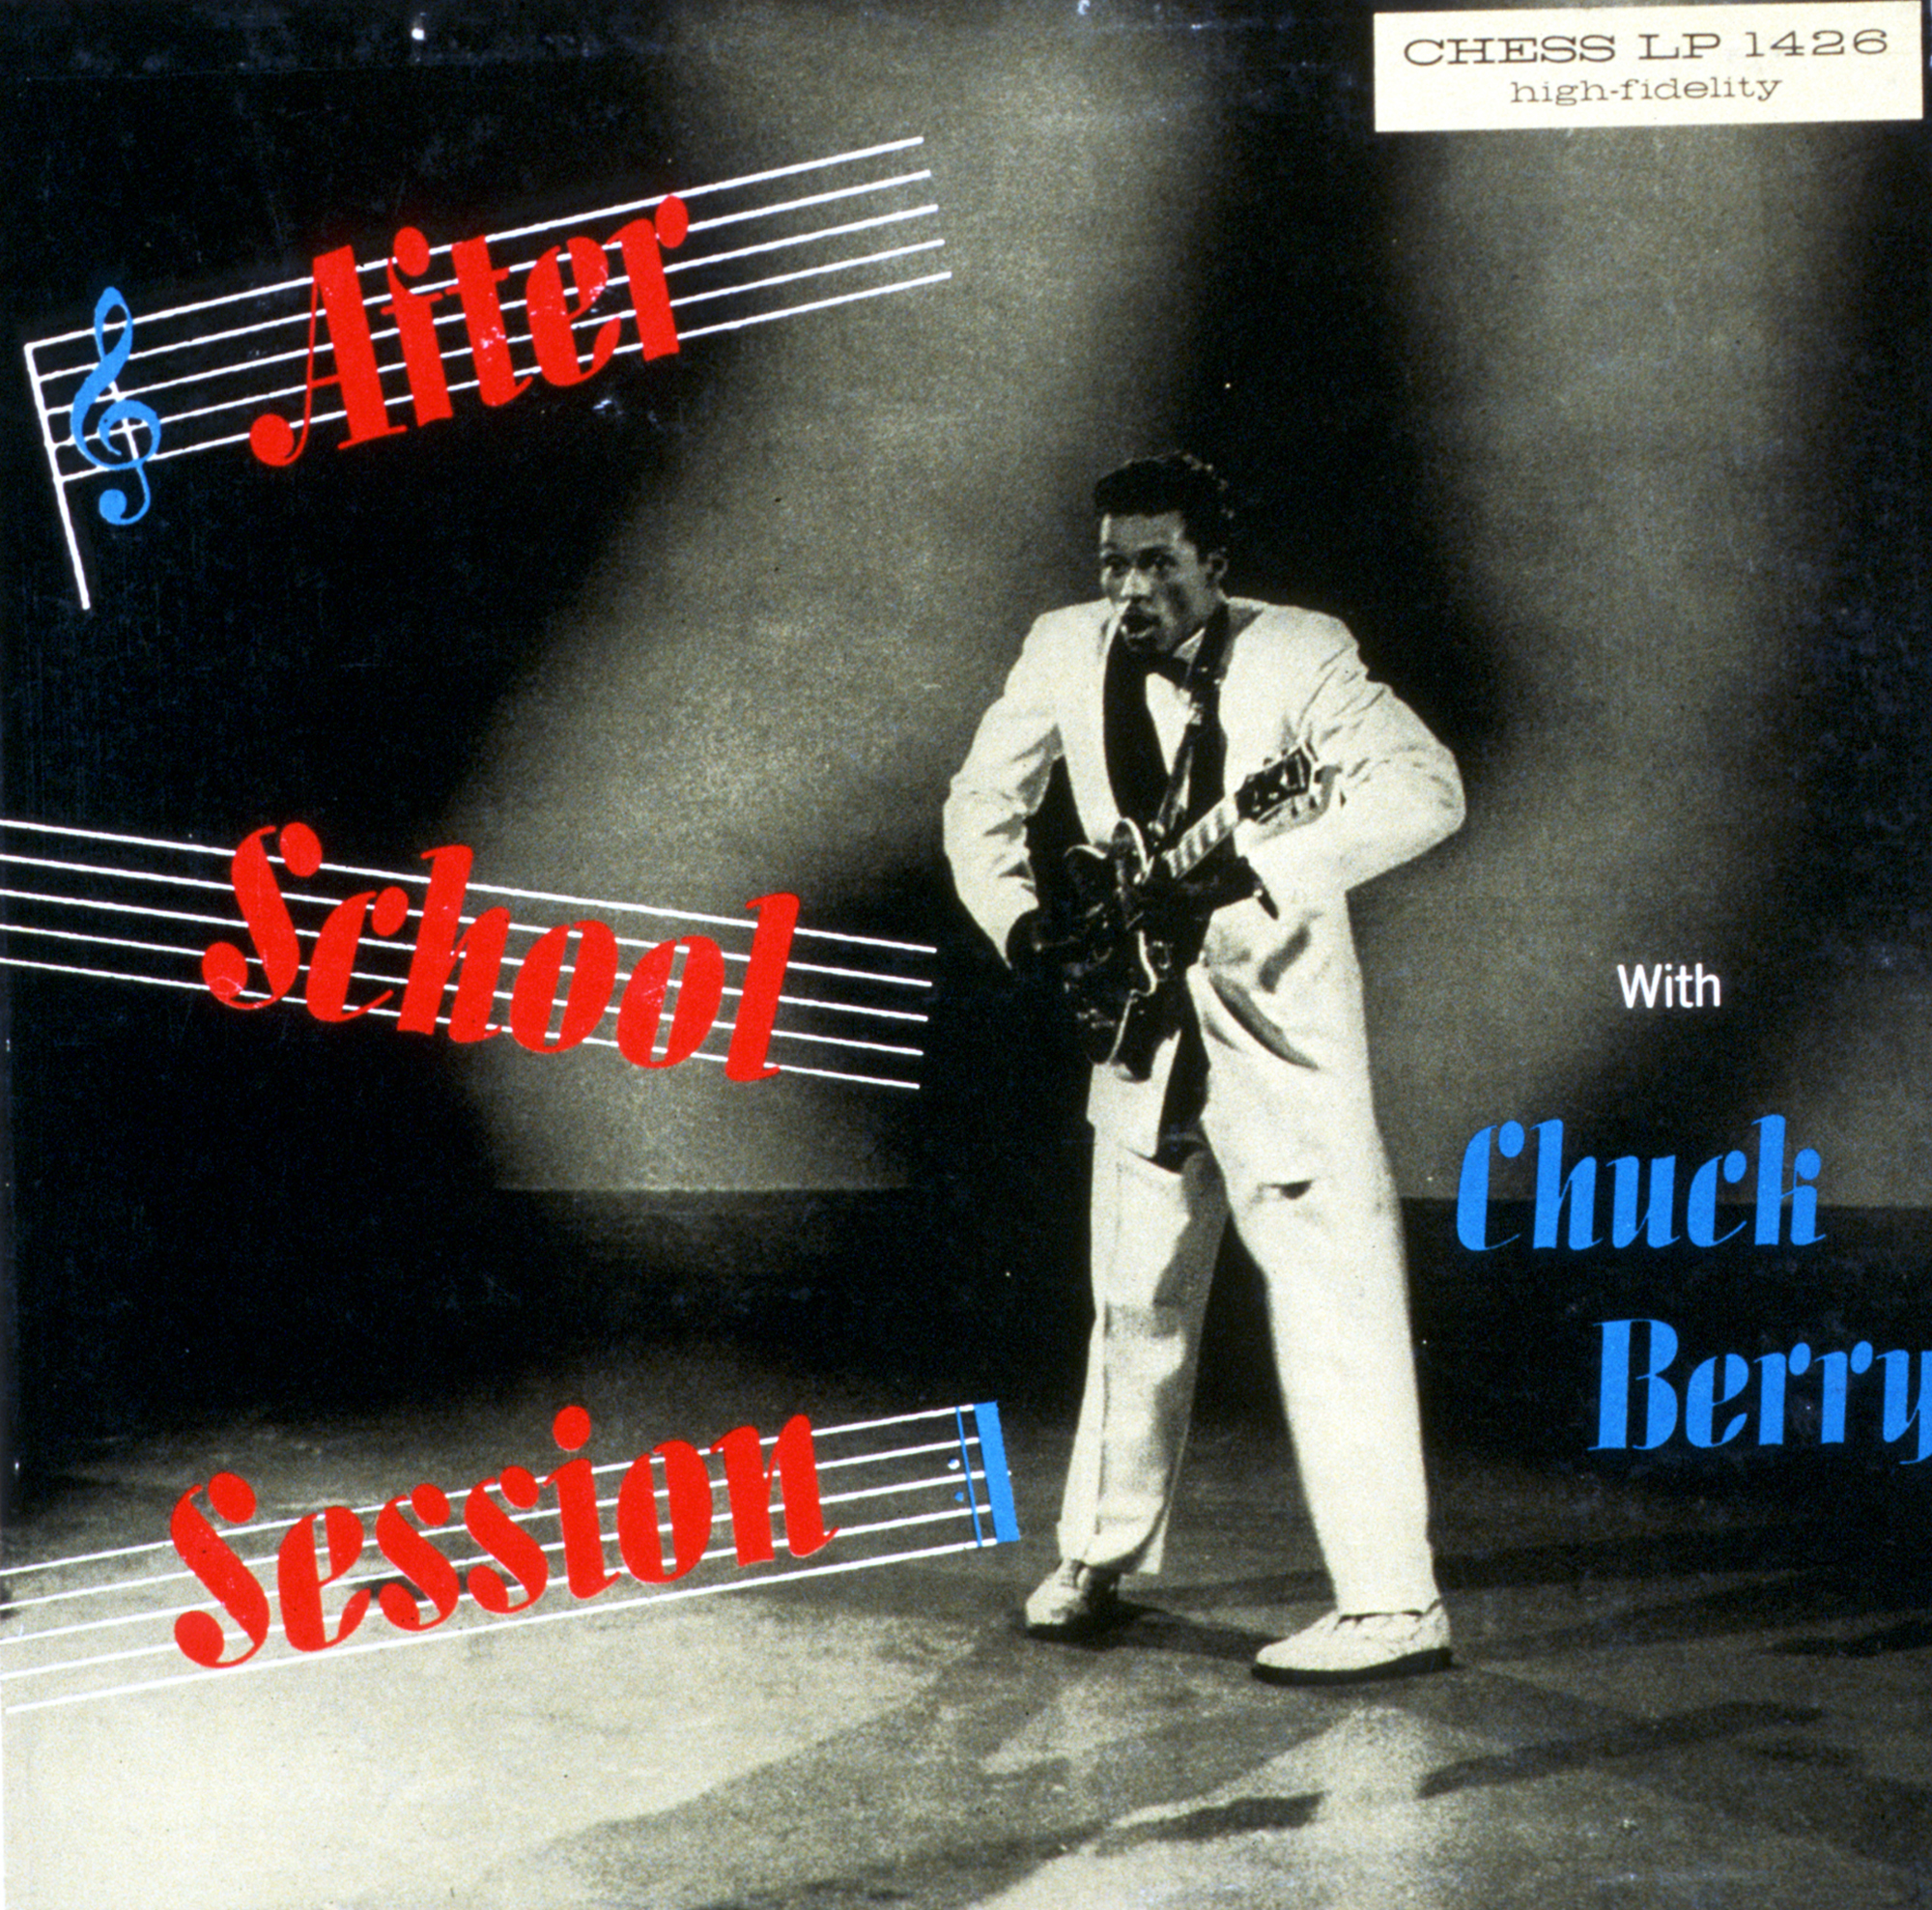 Chuck Berry's debut album After School Sessions, which was released on May 1, 1957.